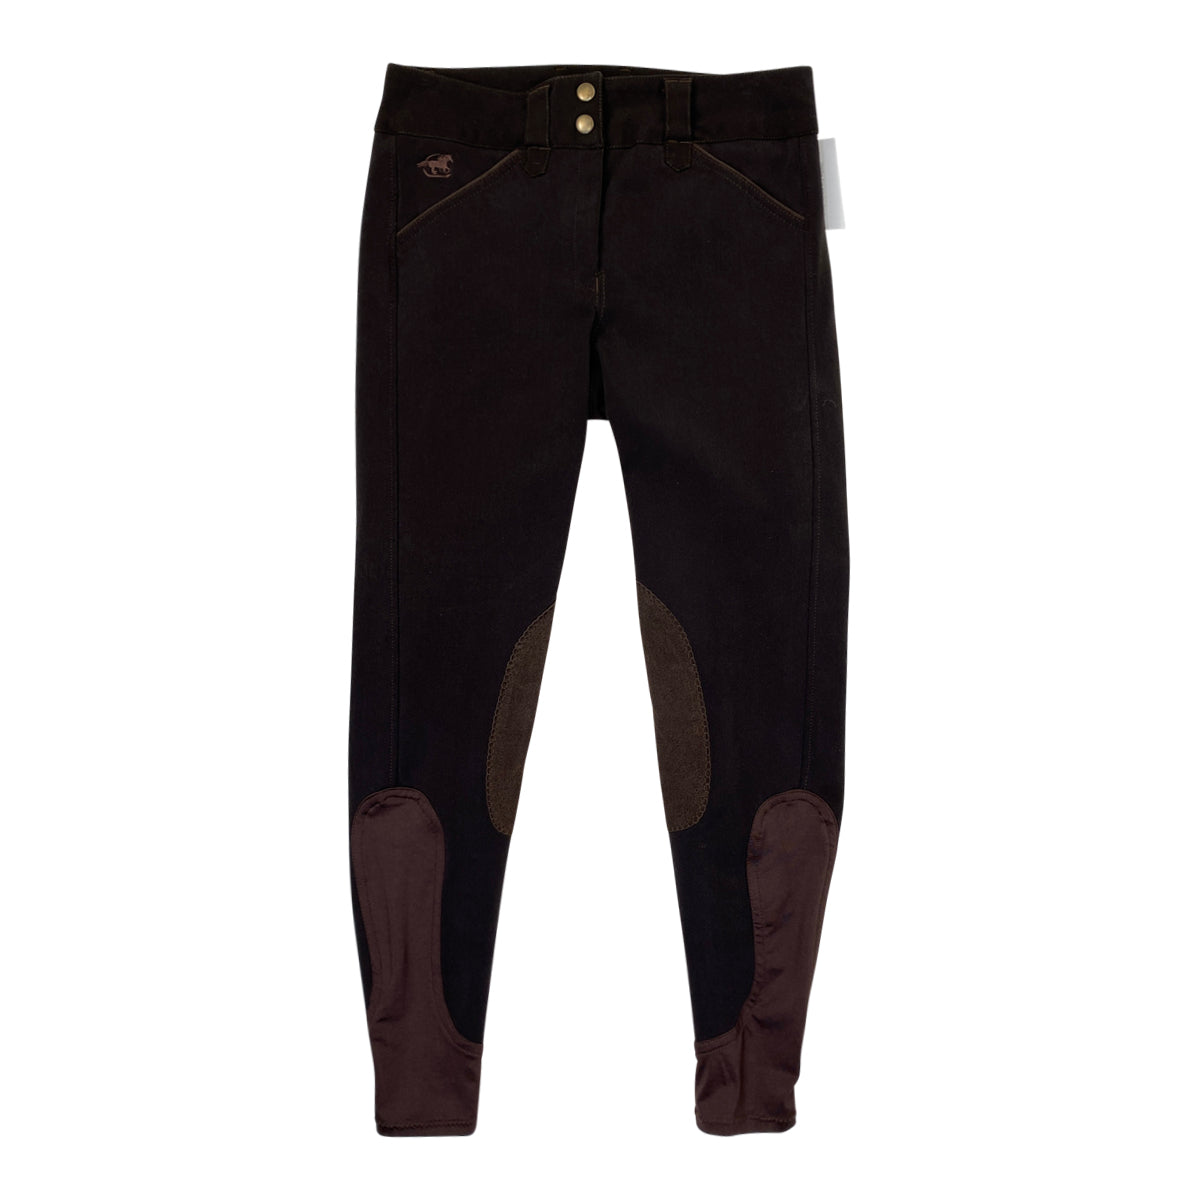 SmartPak &#39;Piper&#39; Knee Patch Breeches in Brown